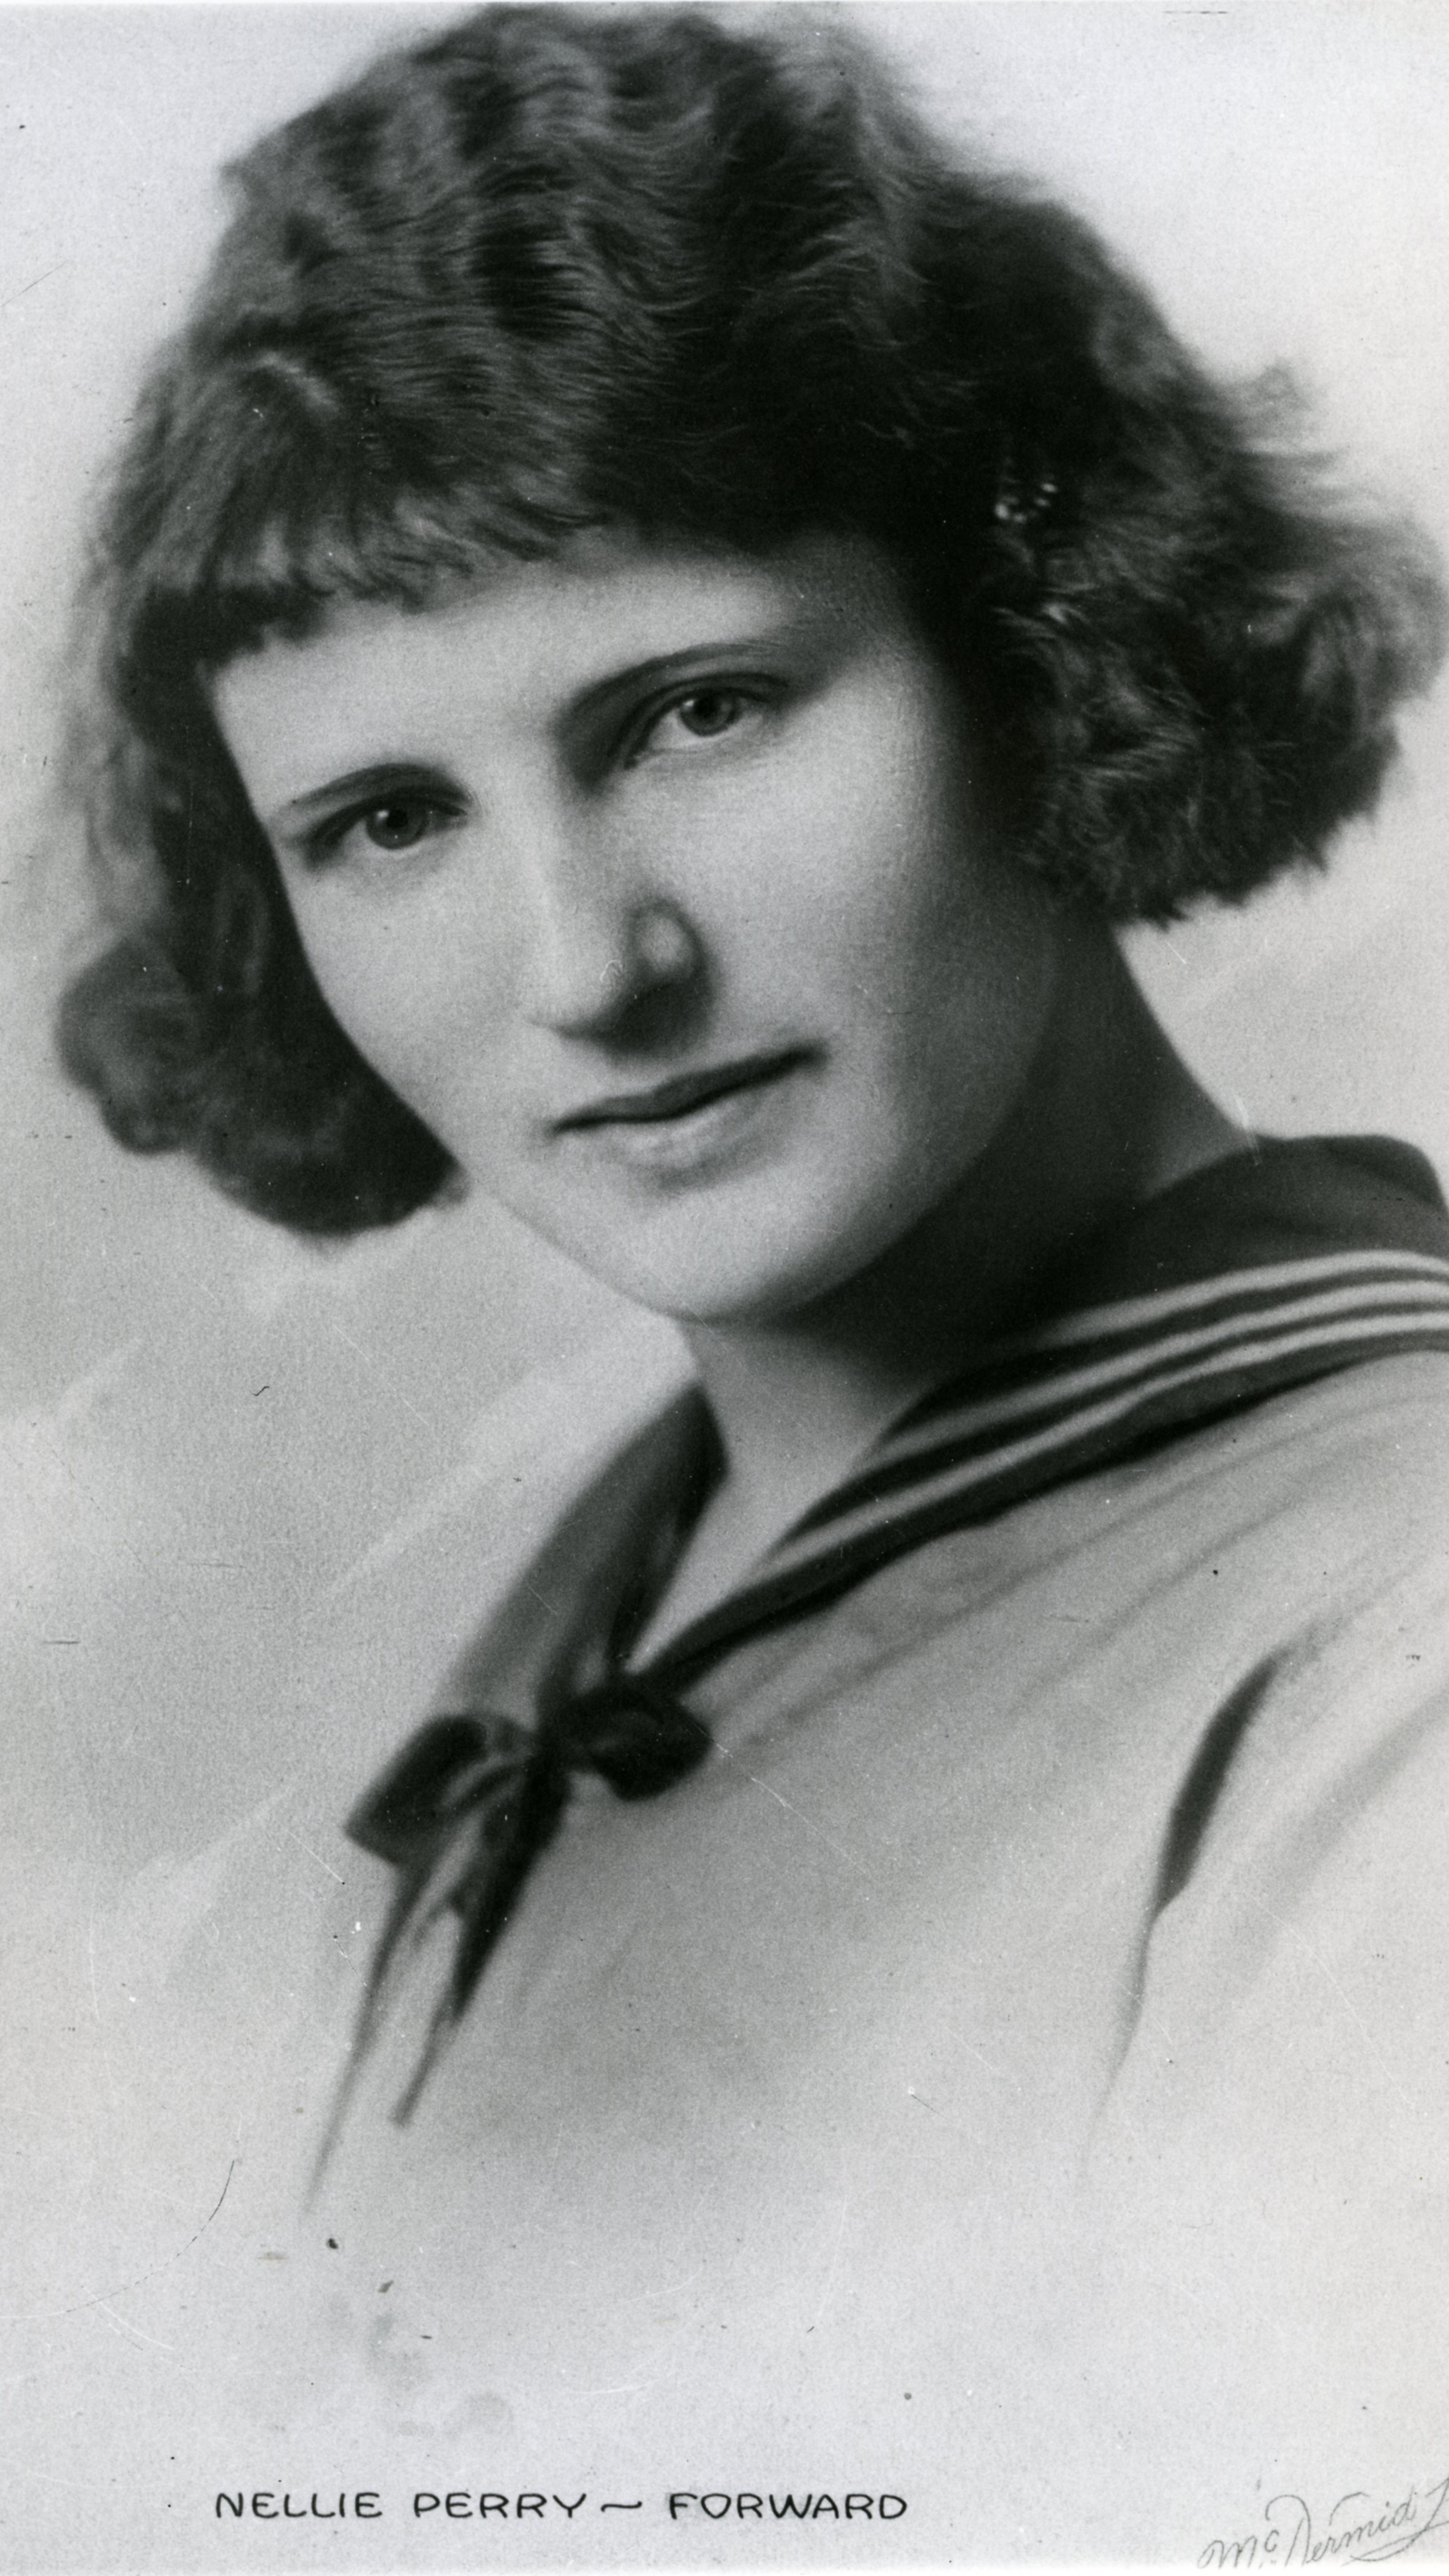 Hall of Famer NELLIE PERRY MCINTOSH